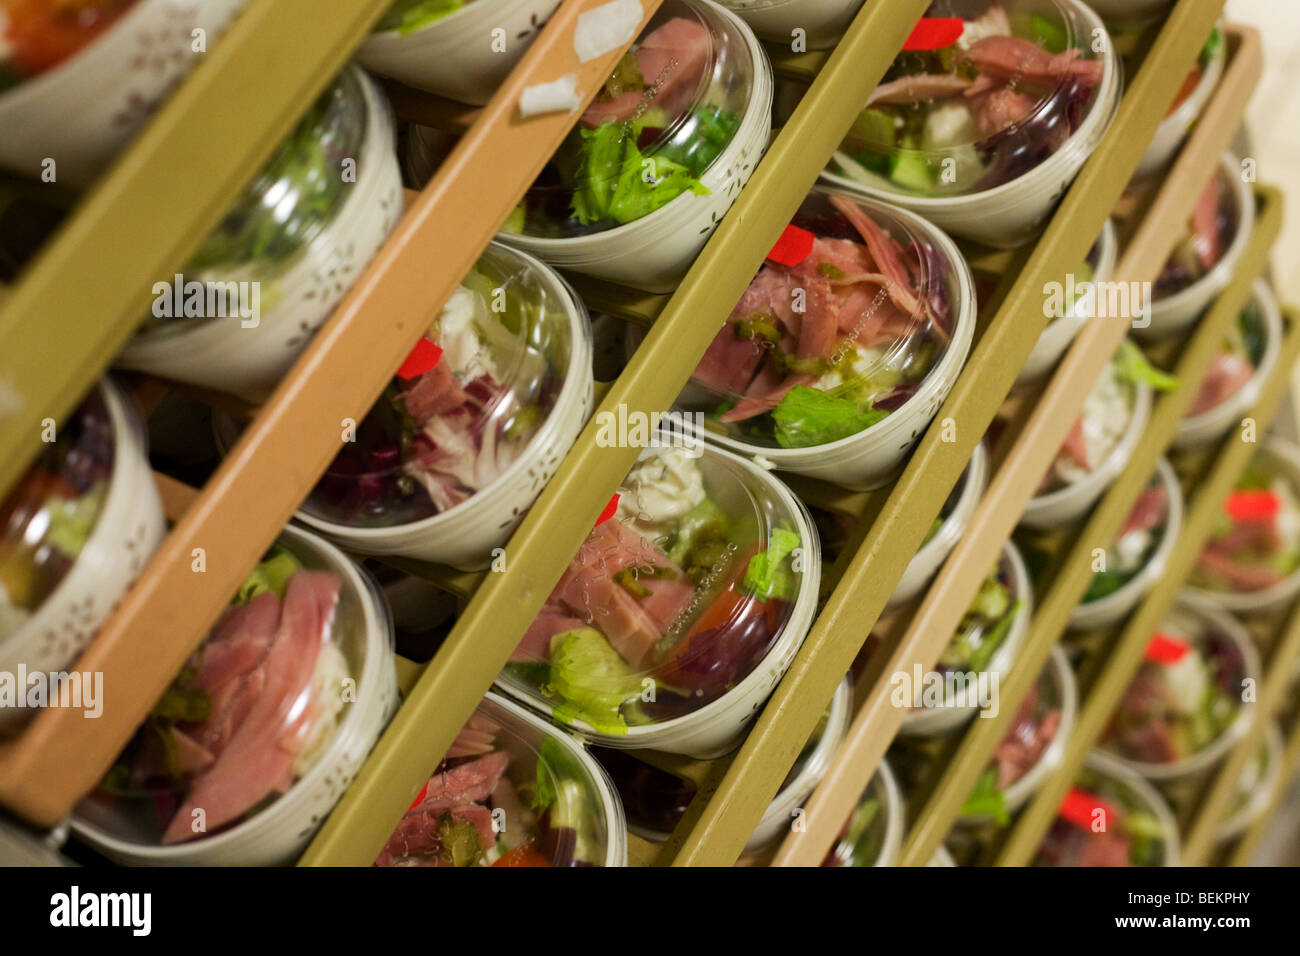 Meat salads are stacked in readiness for an airline in-flight meals at Gate Gourmet, Heathrow airport. Stock Photo